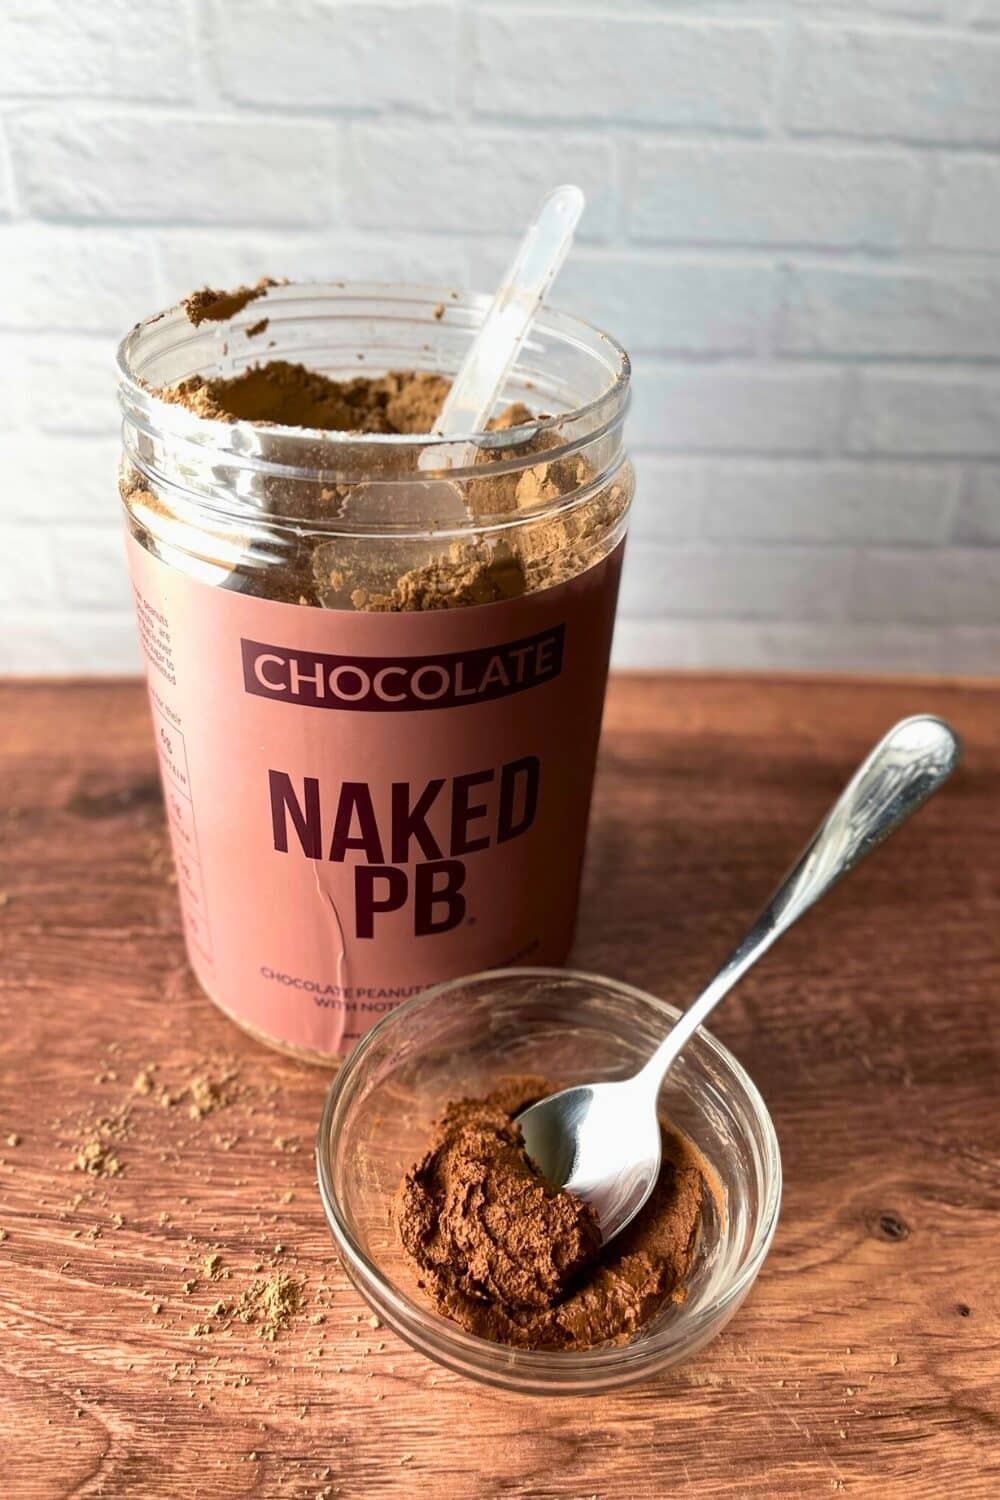 Unveiling the transformation, the Naked Nutrition Chocolate Powdered Peanut Butter jar stands open, its scoop nestled atop the velvety brown powder. Adjacent, a petite glass container holds a scoop transformed into a luscious peanut butter paste, having been reconstituted with a touch of water. This captivating tableau unfolds against a backdrop of a pure white surface and a natural wooden table.